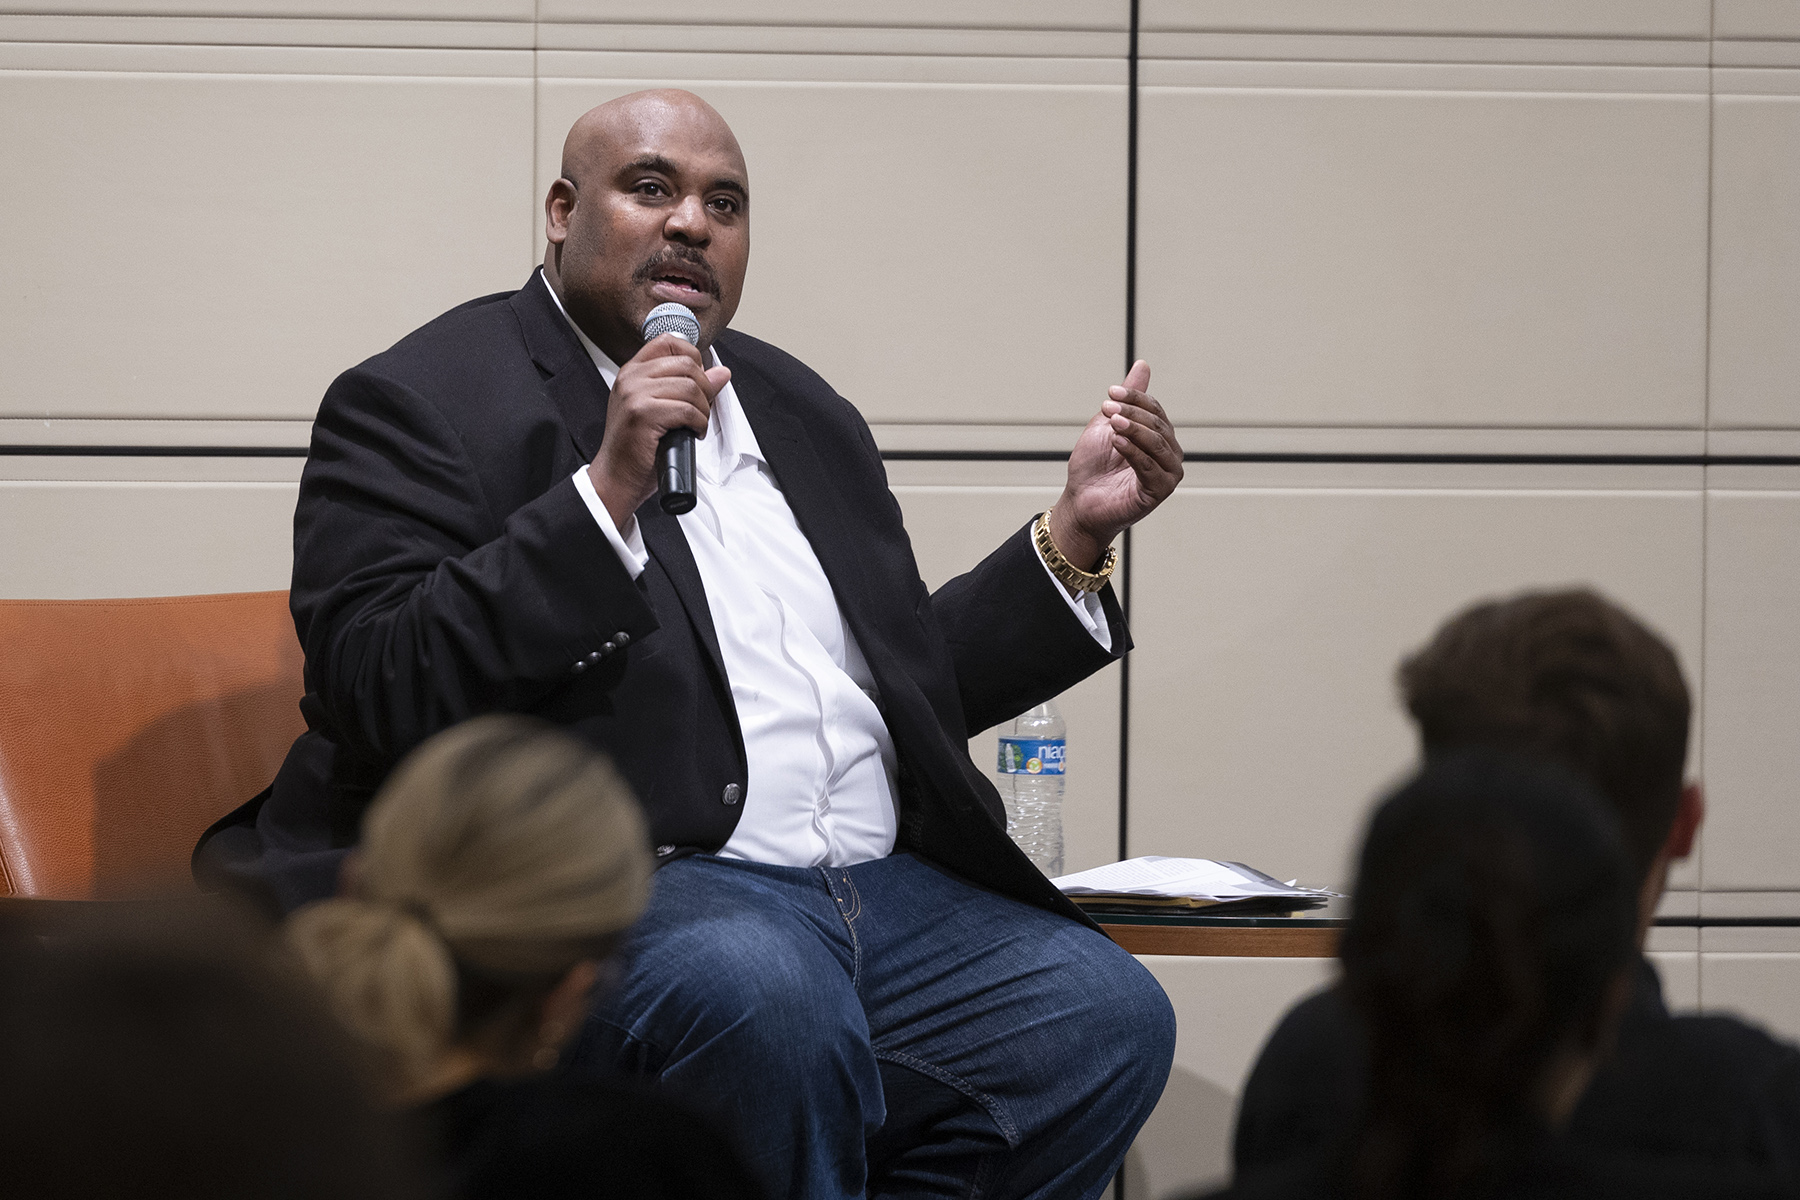 Michael Fortner moderated the dialogue on Systemic Racism at a recent Ath talk.